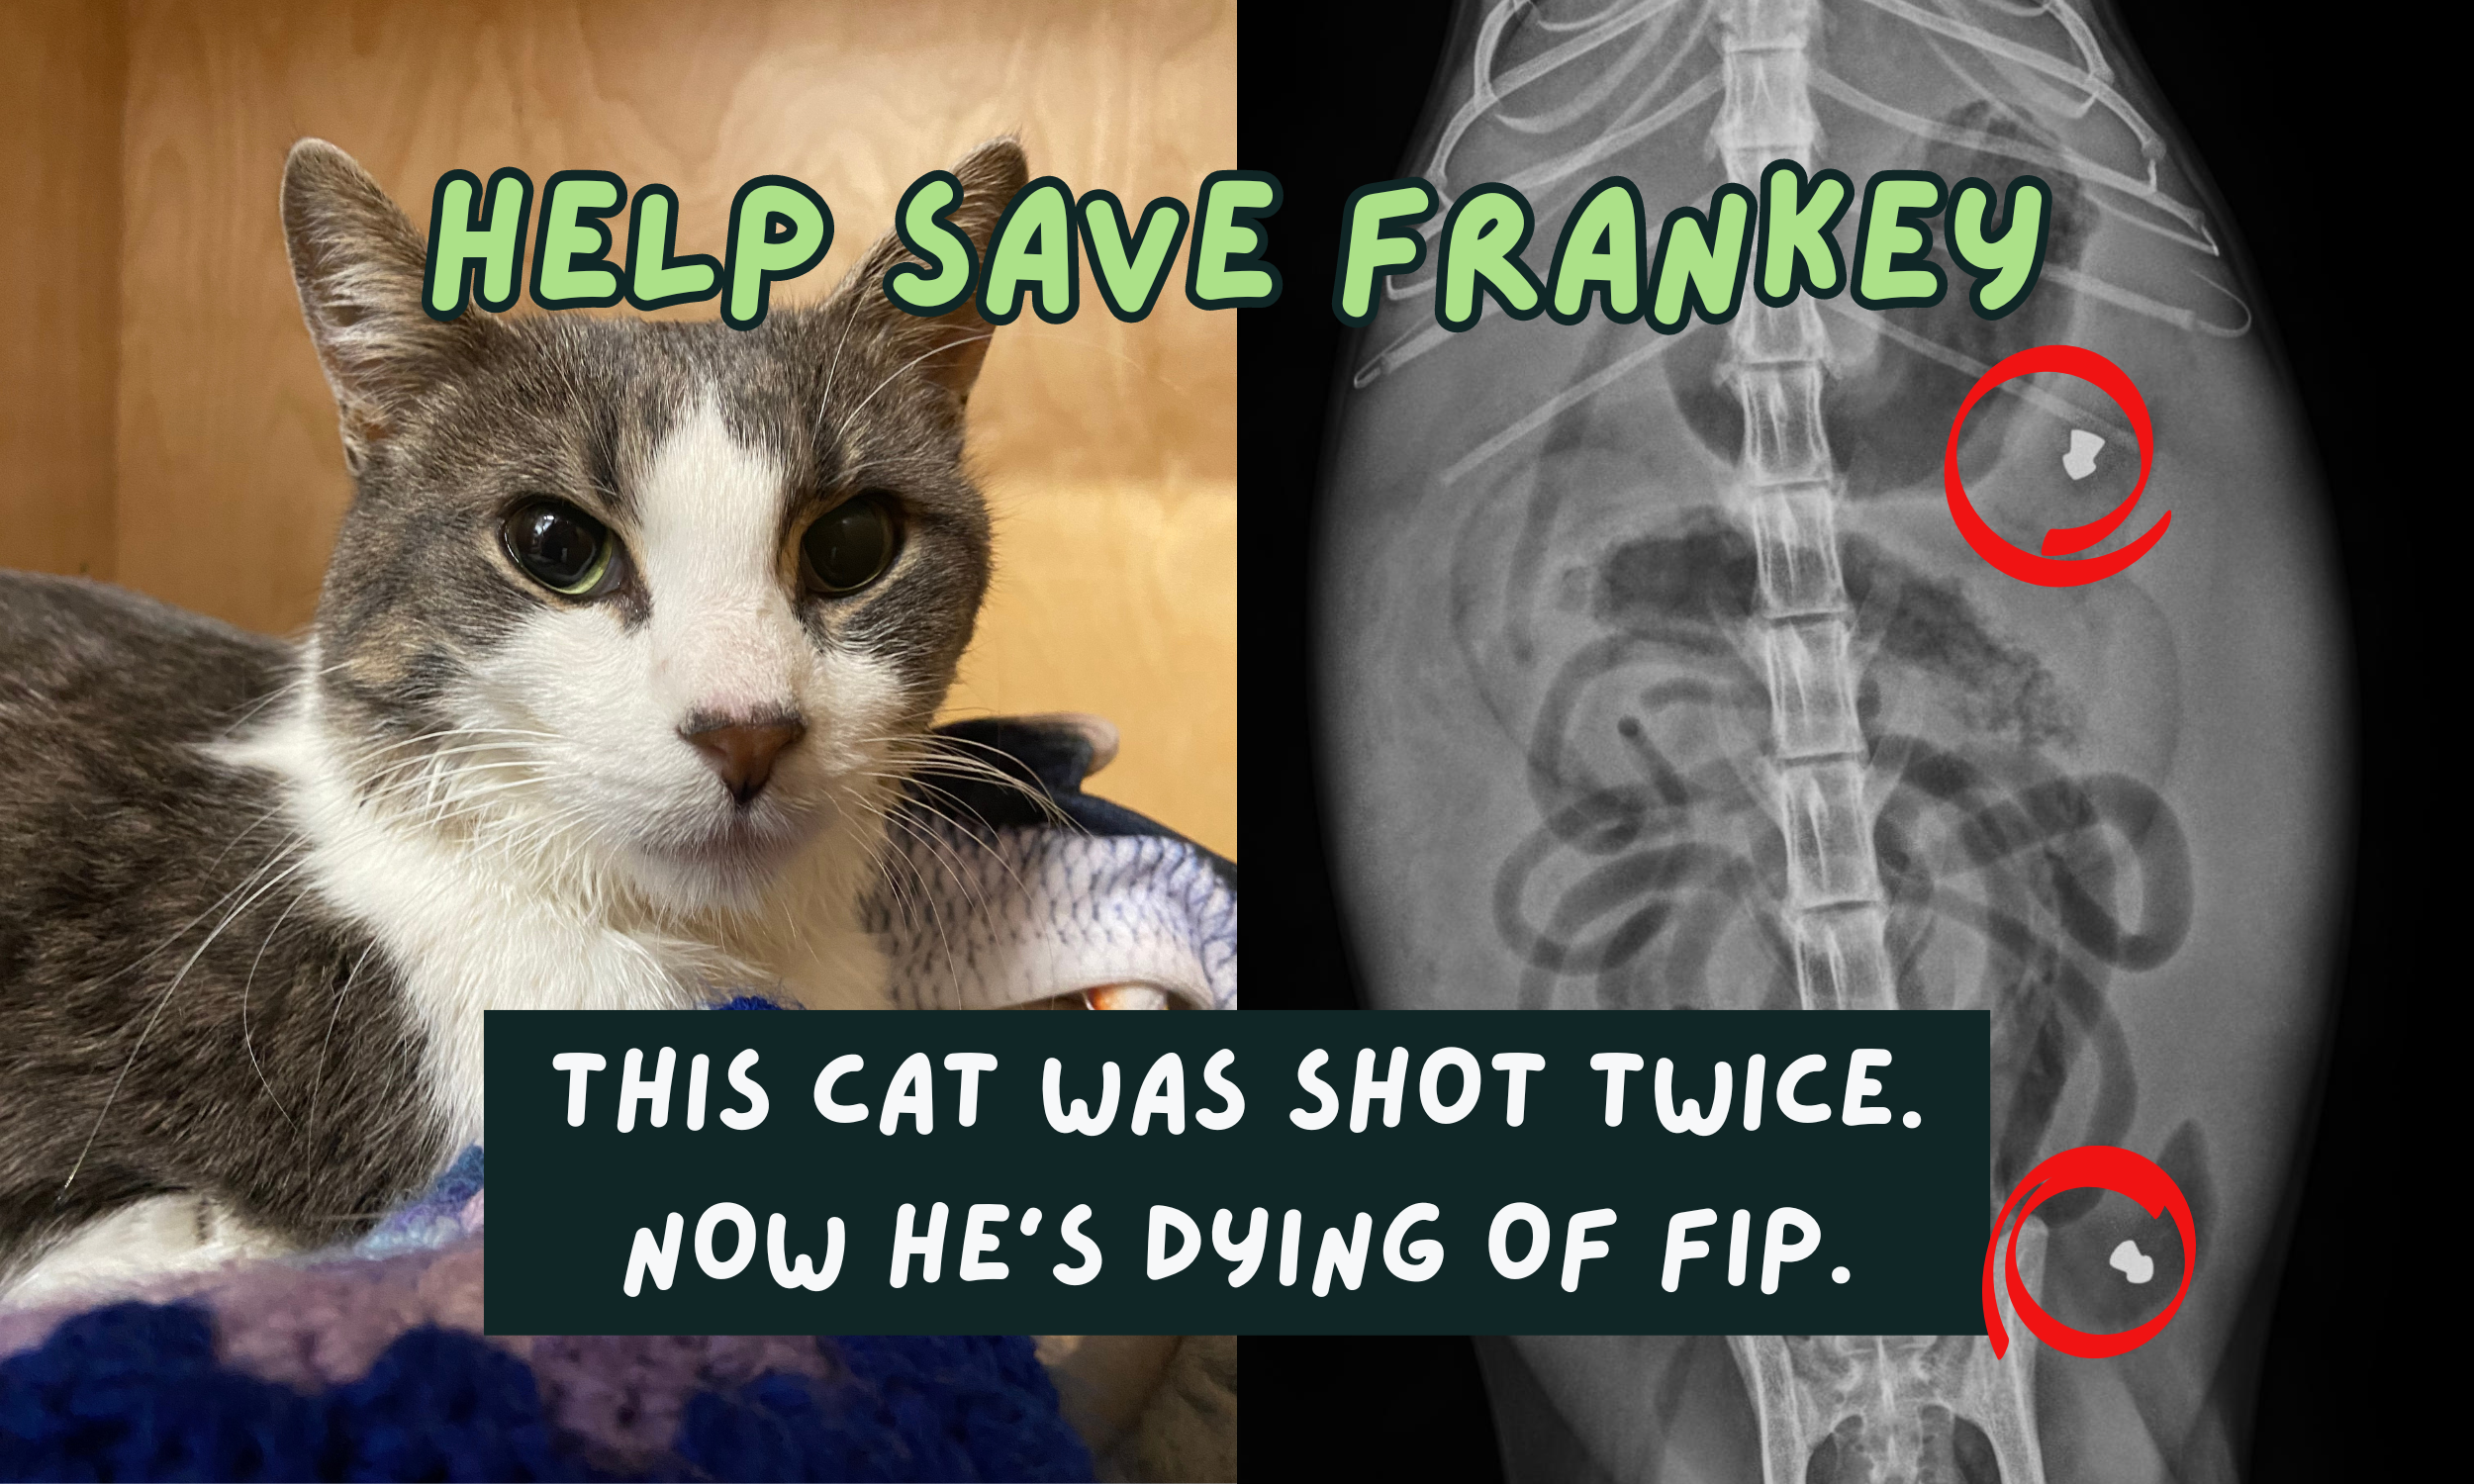 Frankey was shot twice and survived. But now he needs your help.